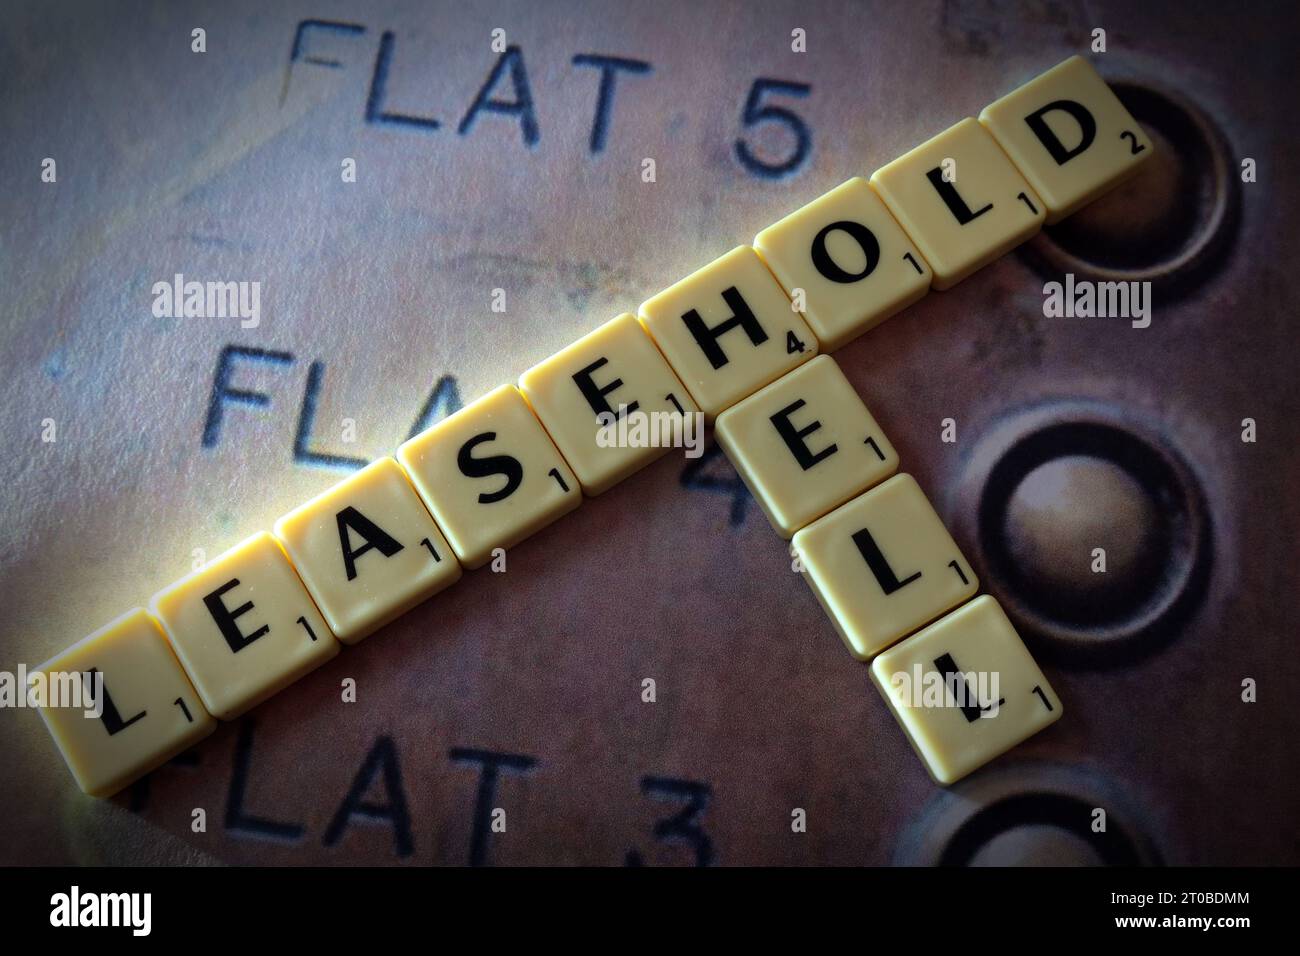 Leasehold Hell, in Scrabble letters Stock Photo